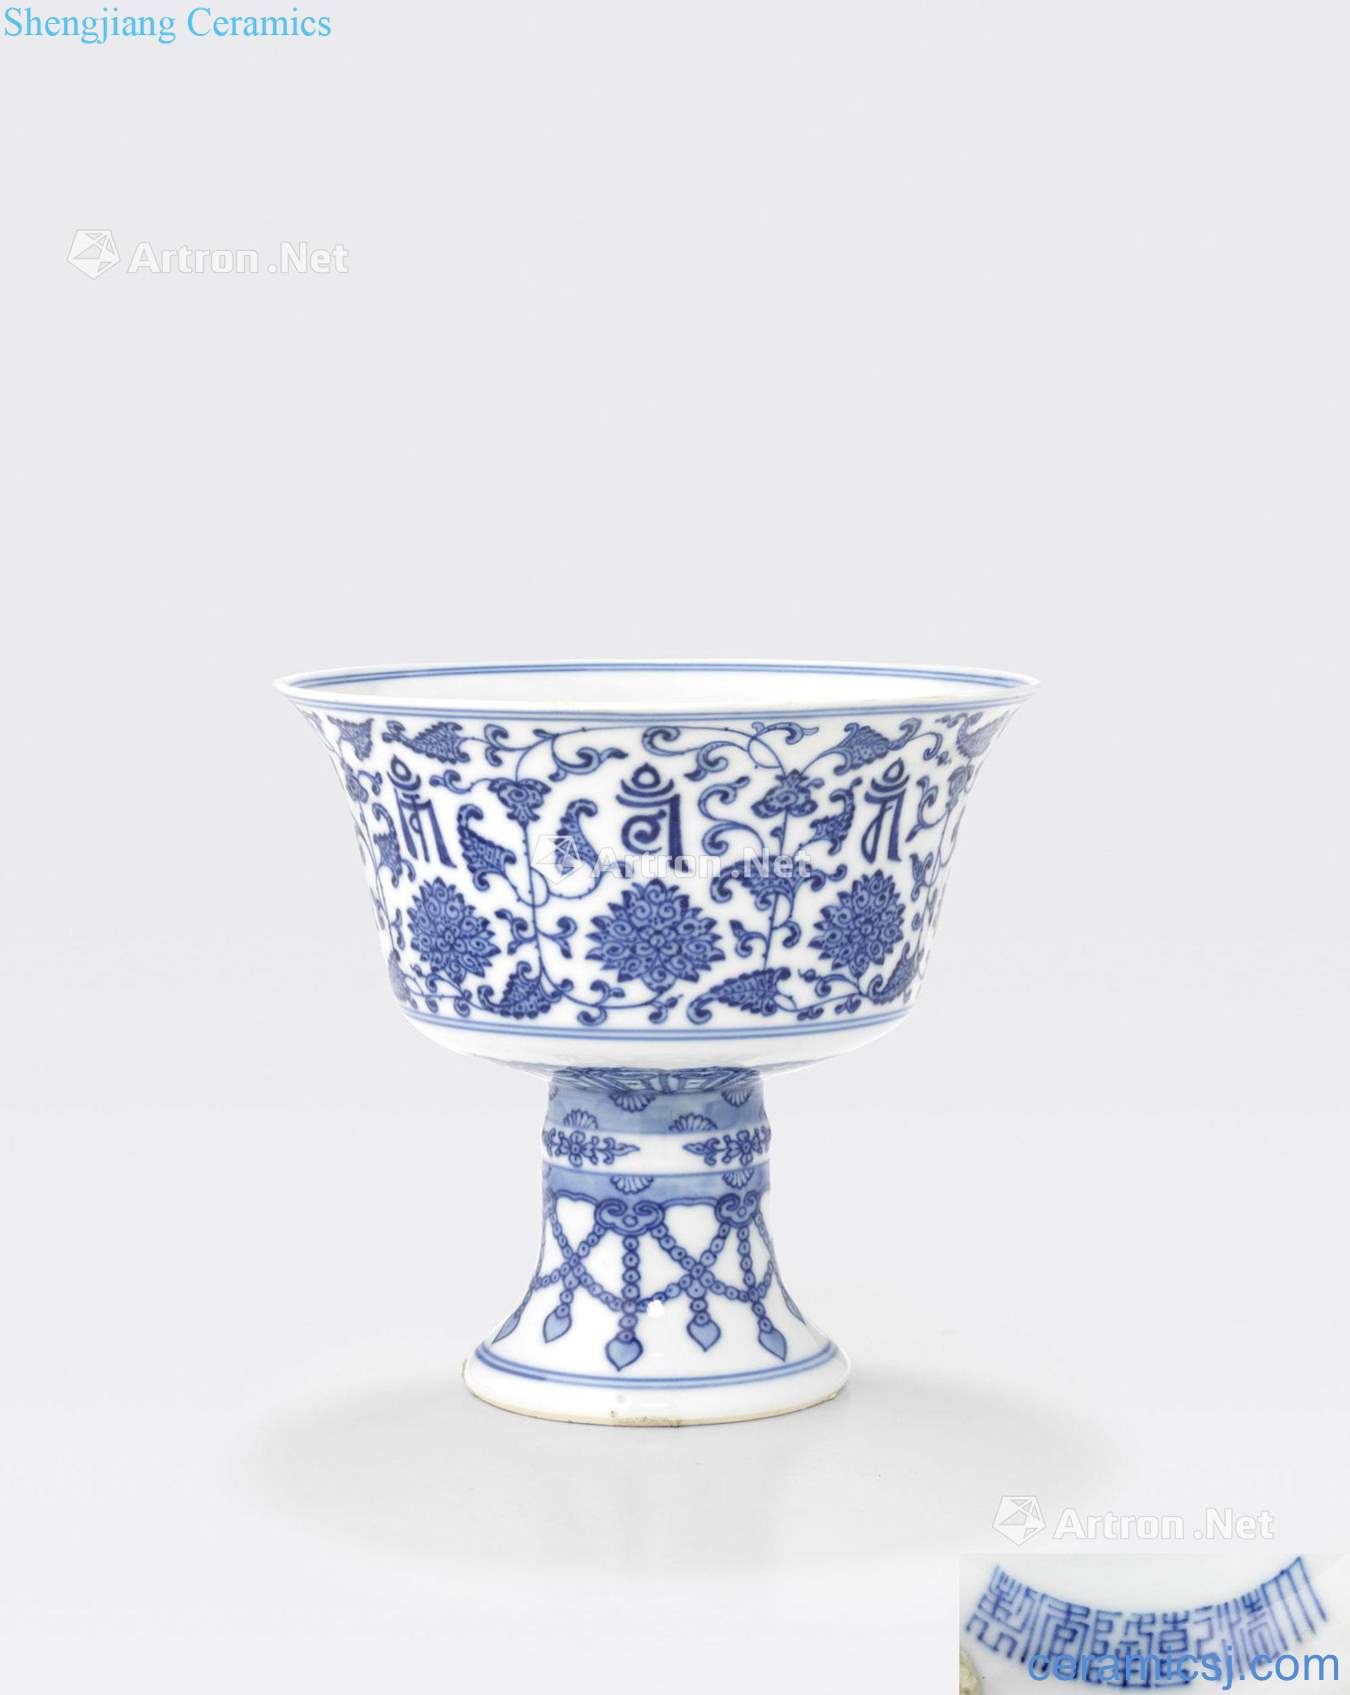 Qianlong six - character mark the and of the period. A BLUE and WHITE STEM BOWL WITH LANTSA INSCRIPTION